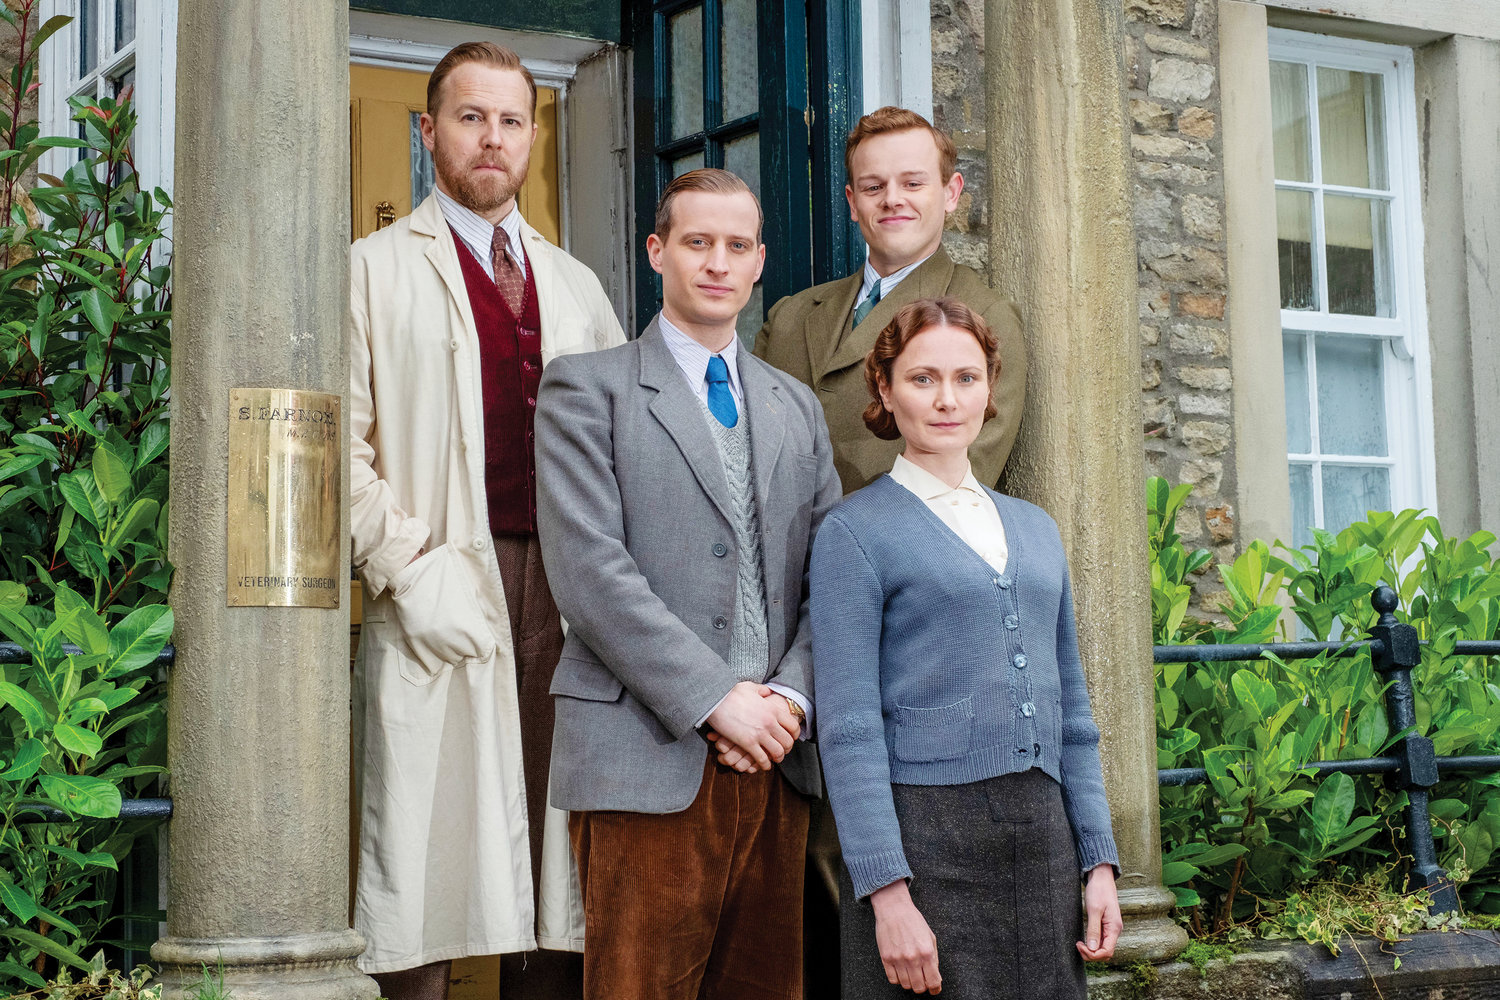 WINNING CAST—Samuel West, Callum Woodhouse, Nicholas Ralph and Anna Madeley star in the PBS show "All Creatures Great and Small,” the recipient of the 2022 Christopher Spirit Award.